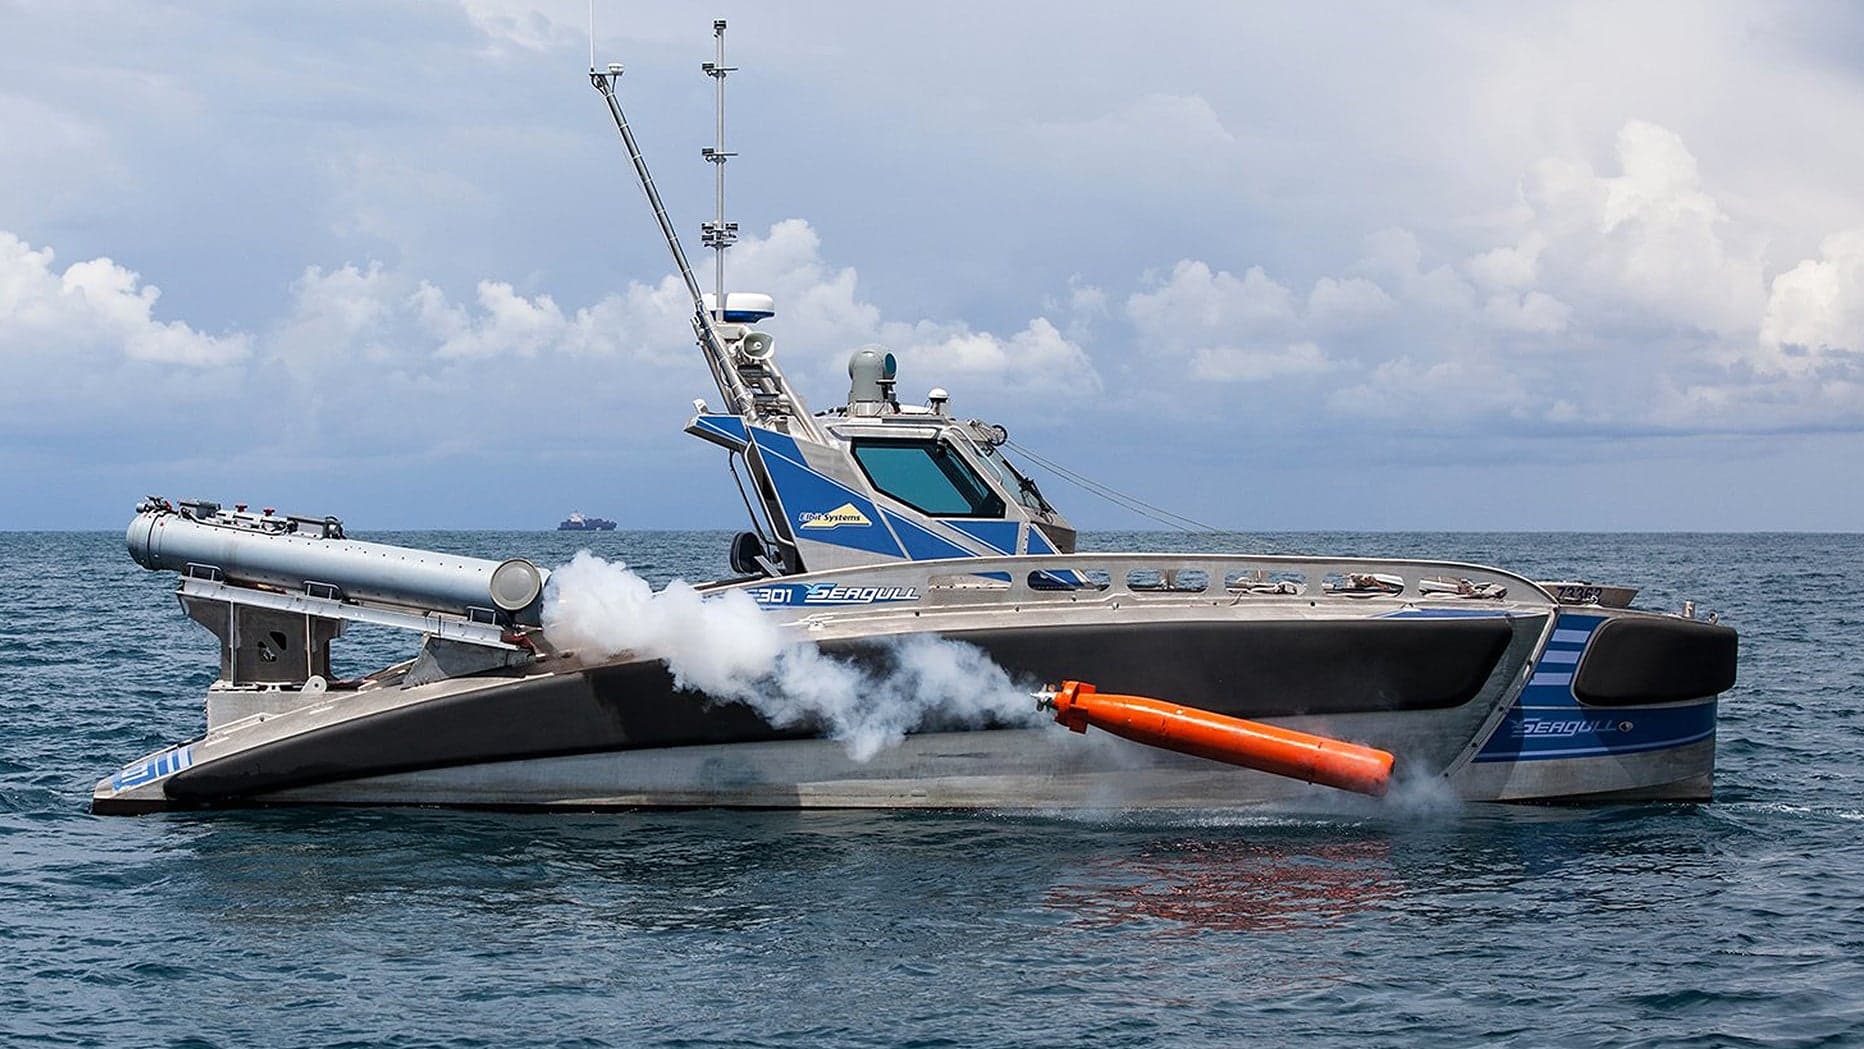 This Israeli Drone Ship May Be Small But It Packs A Big Torpedo